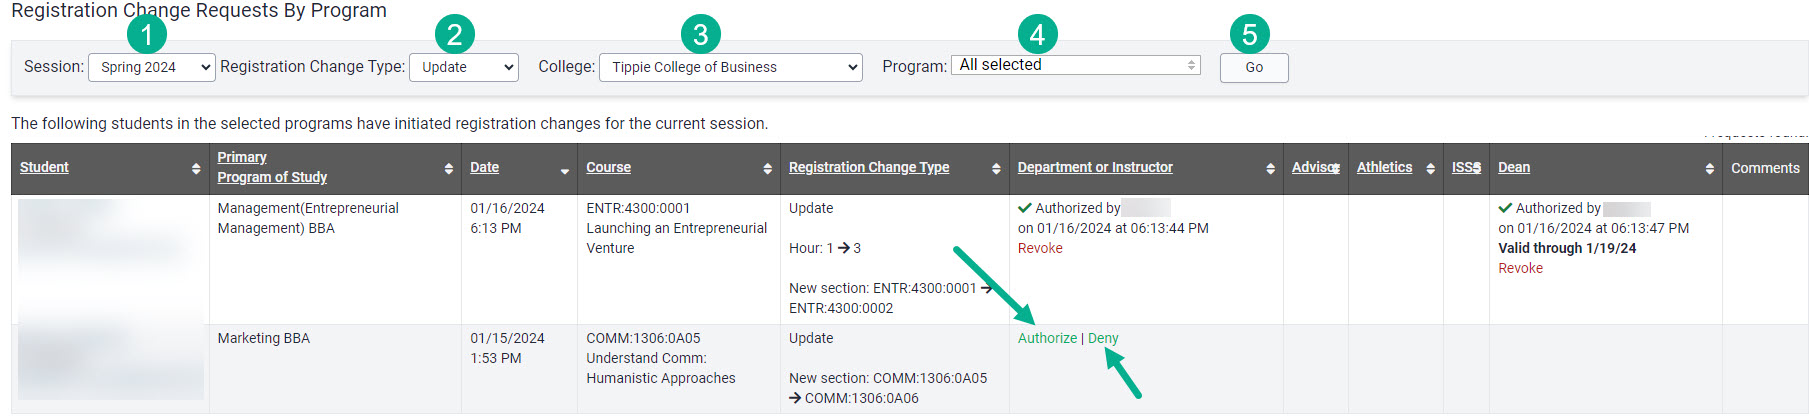 Registration Change Requests by Program report showing parameters to select to view data. 